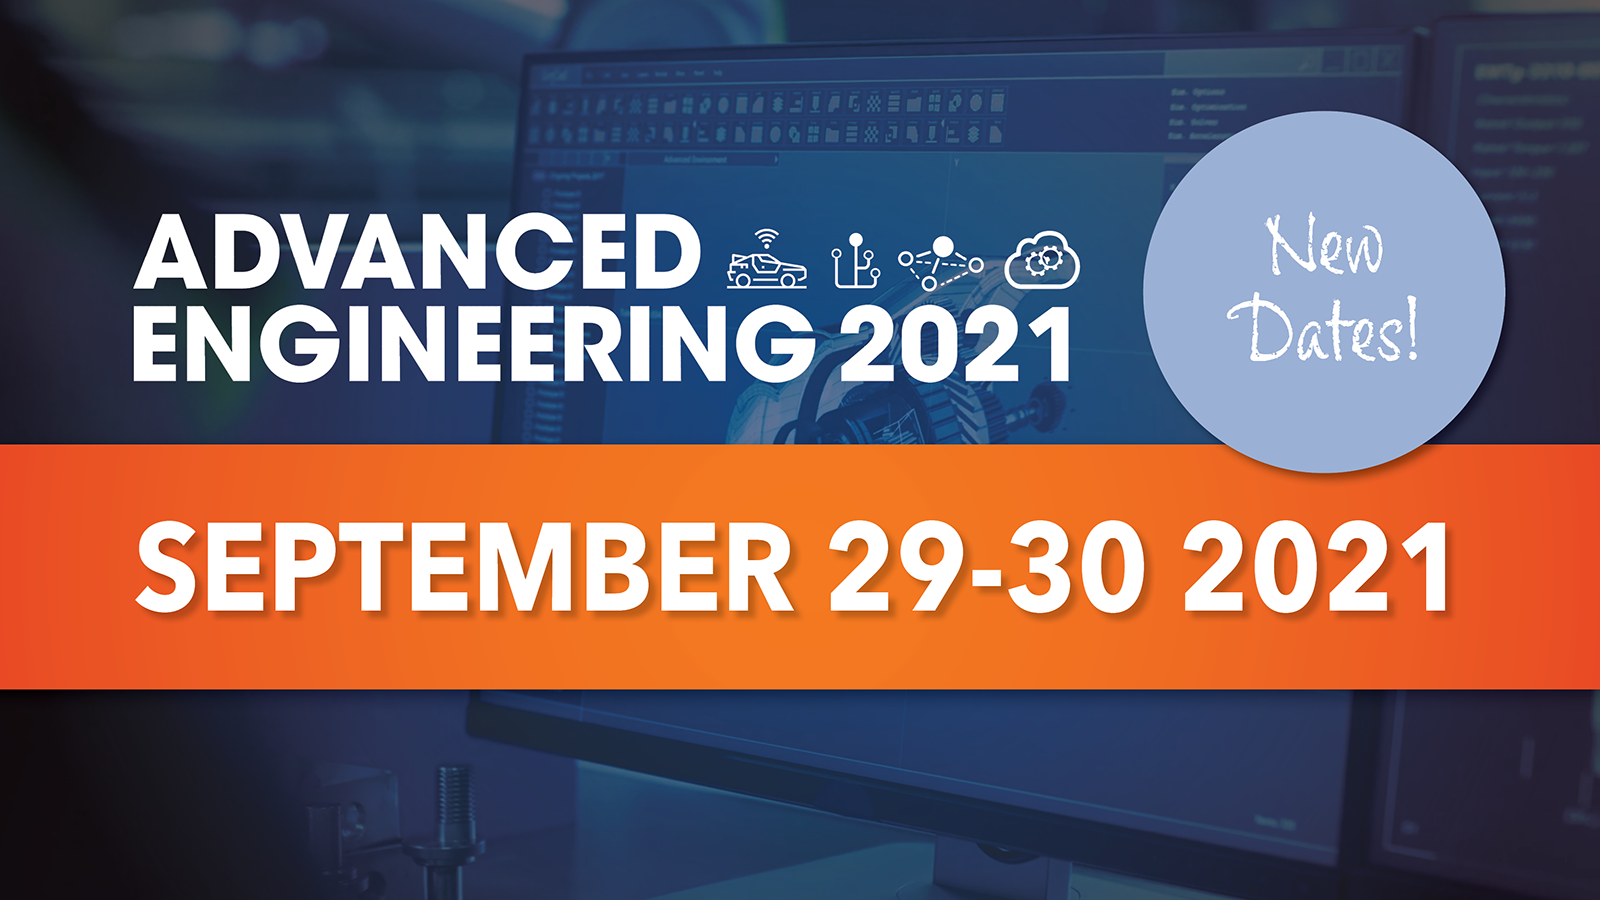 new dates for advanced engineering